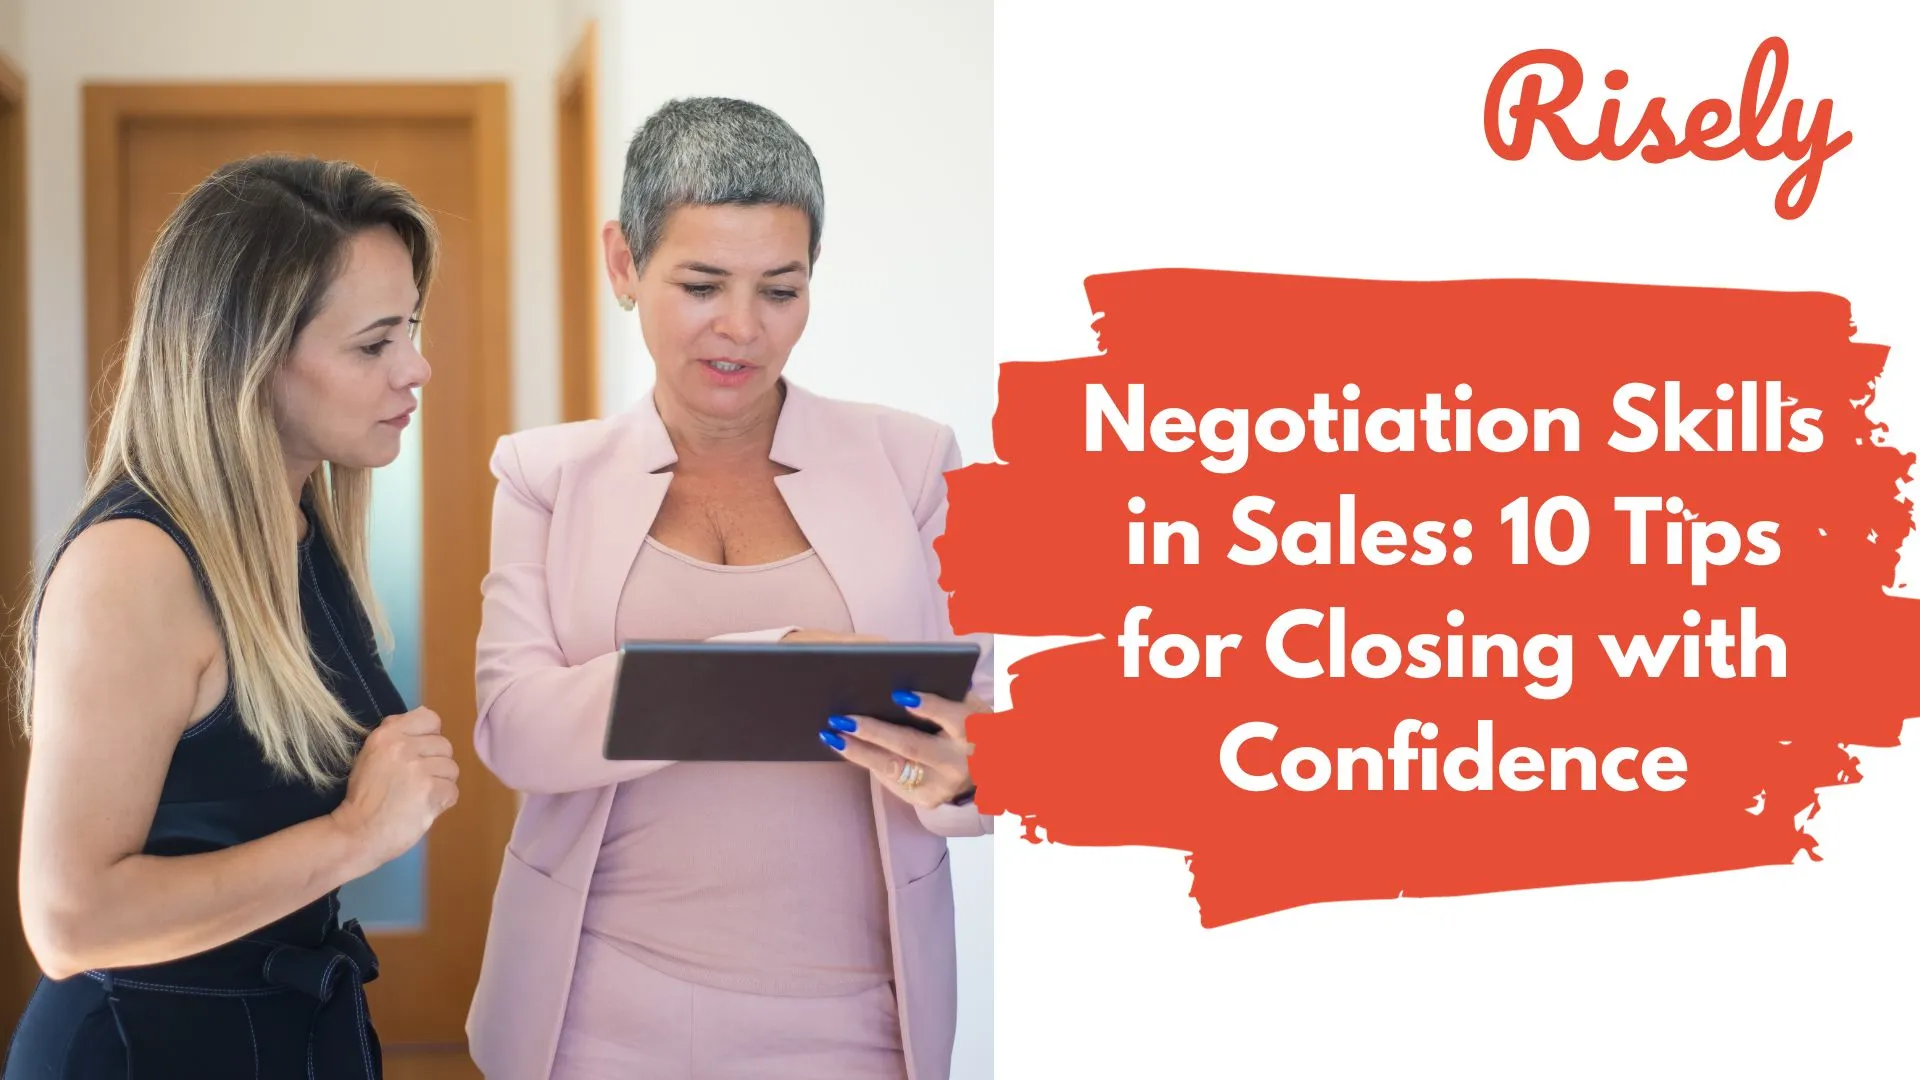 Negotiation Skills in Sales: 10 Tips for Closing with Confidence